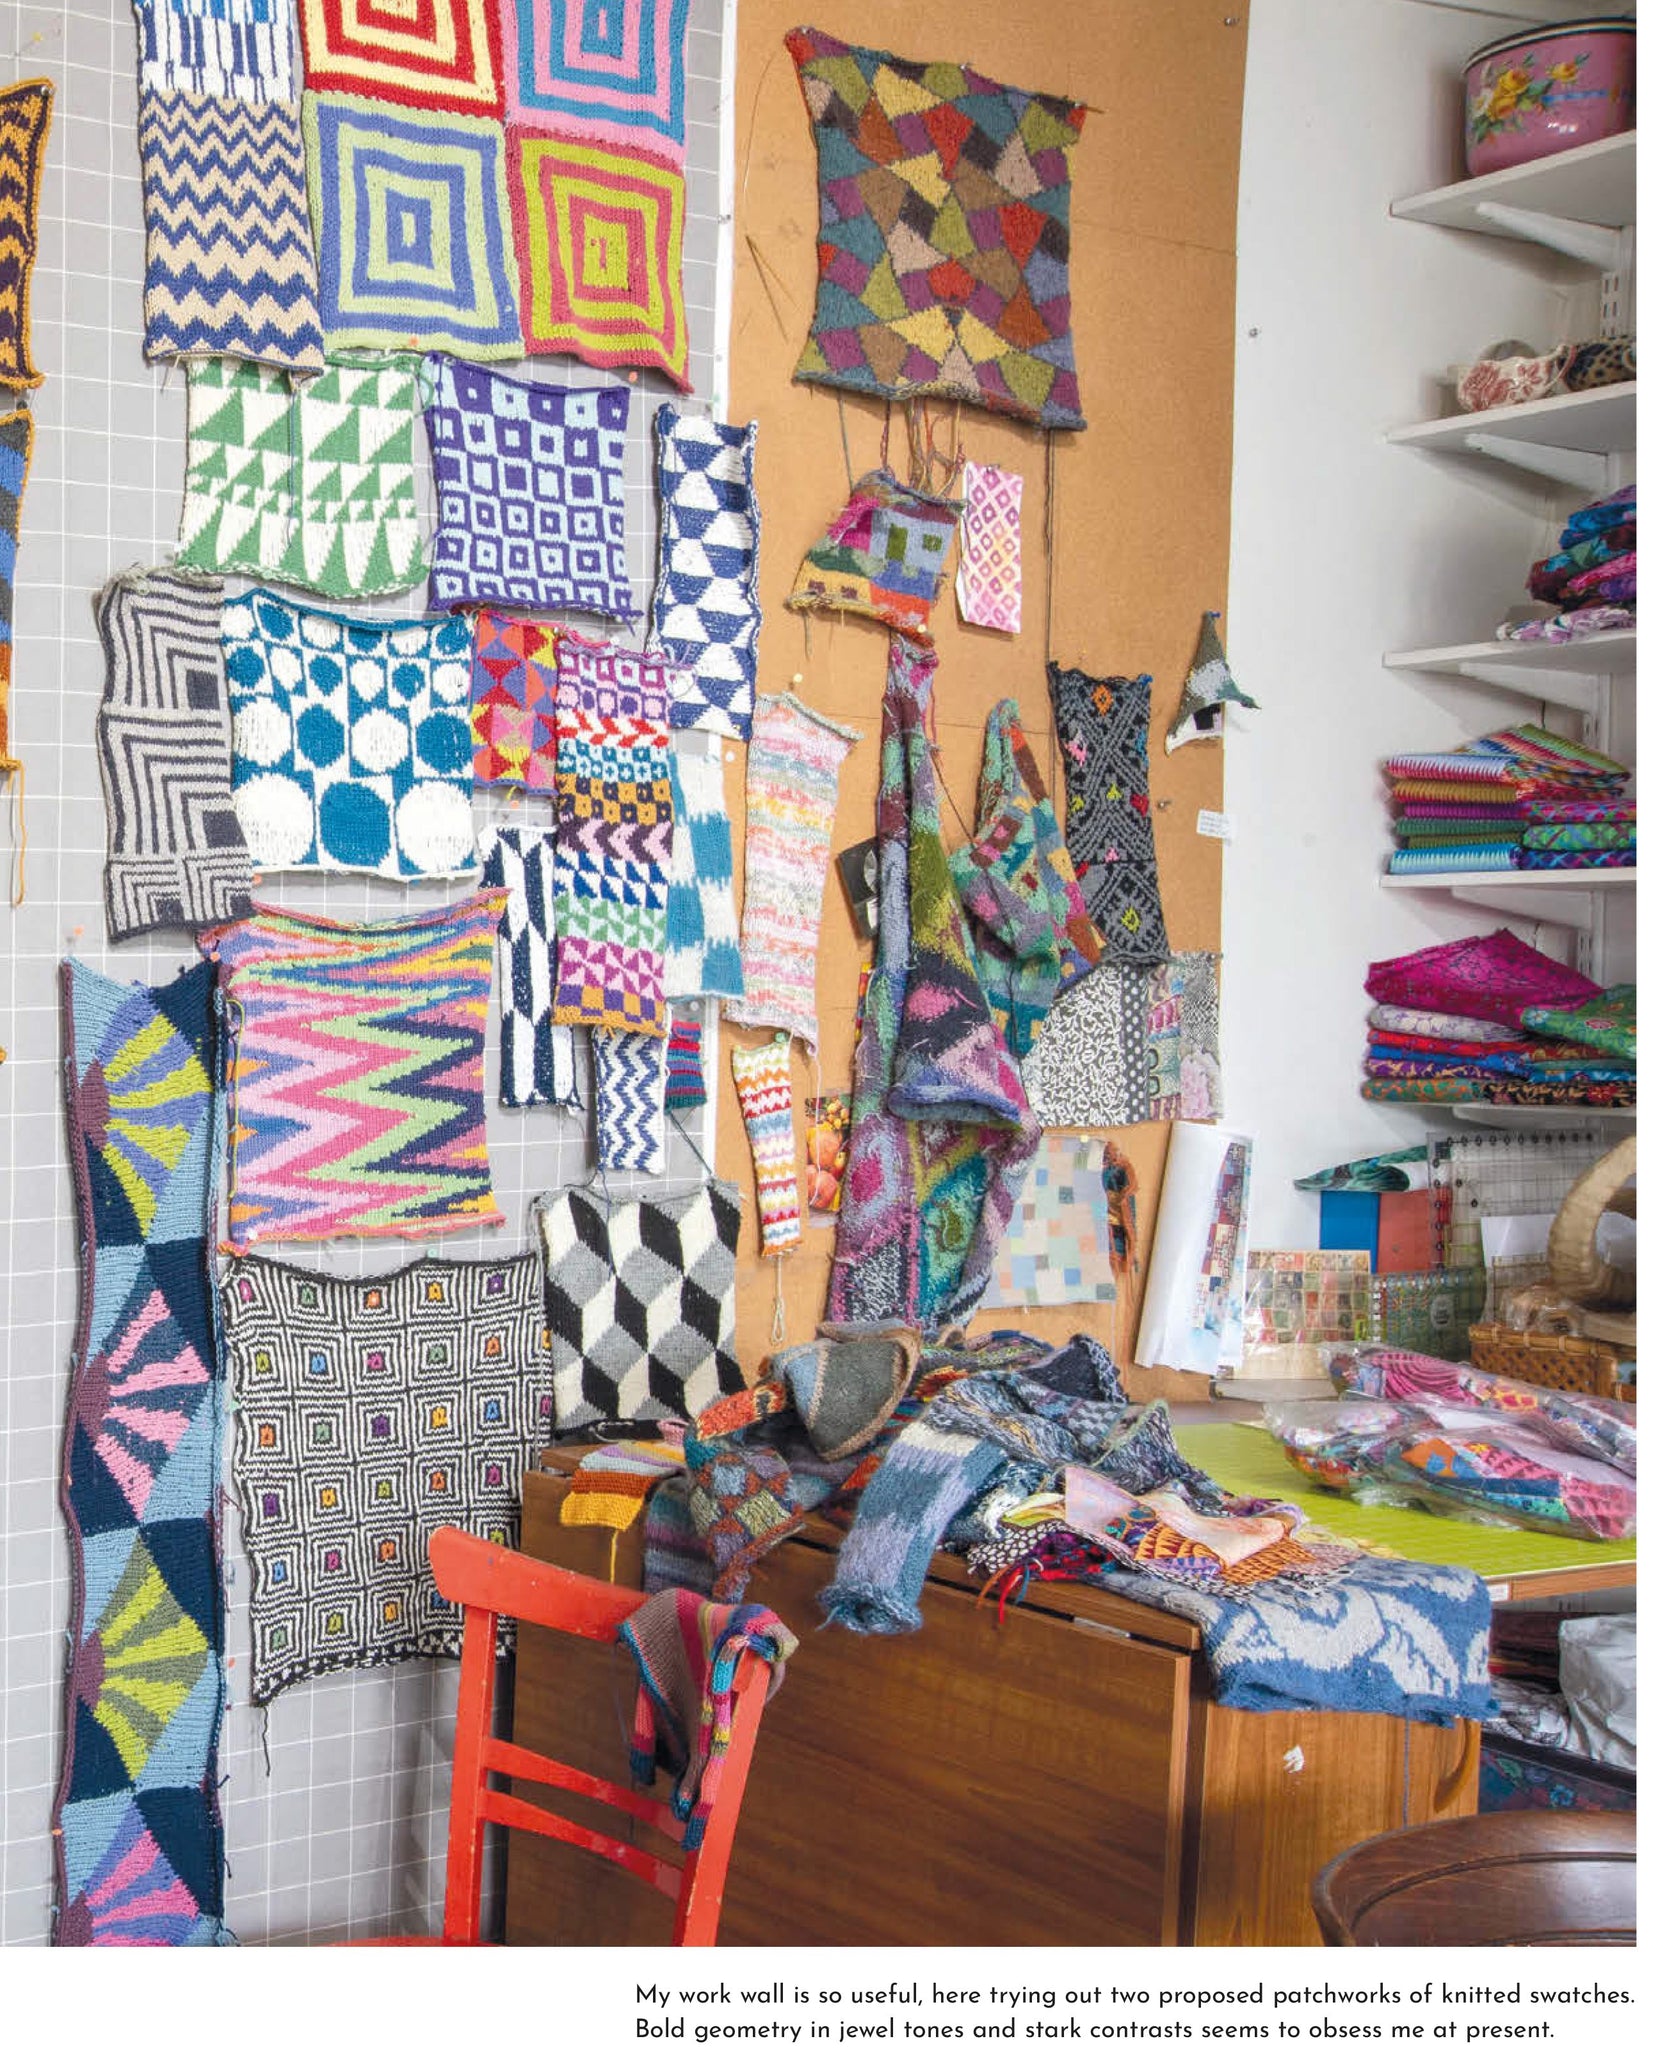 Kaffe Fassett in the Studio: Behind the Scenes with a Master Colorist Book  9781419746260 - Quilt in a Day Patterns